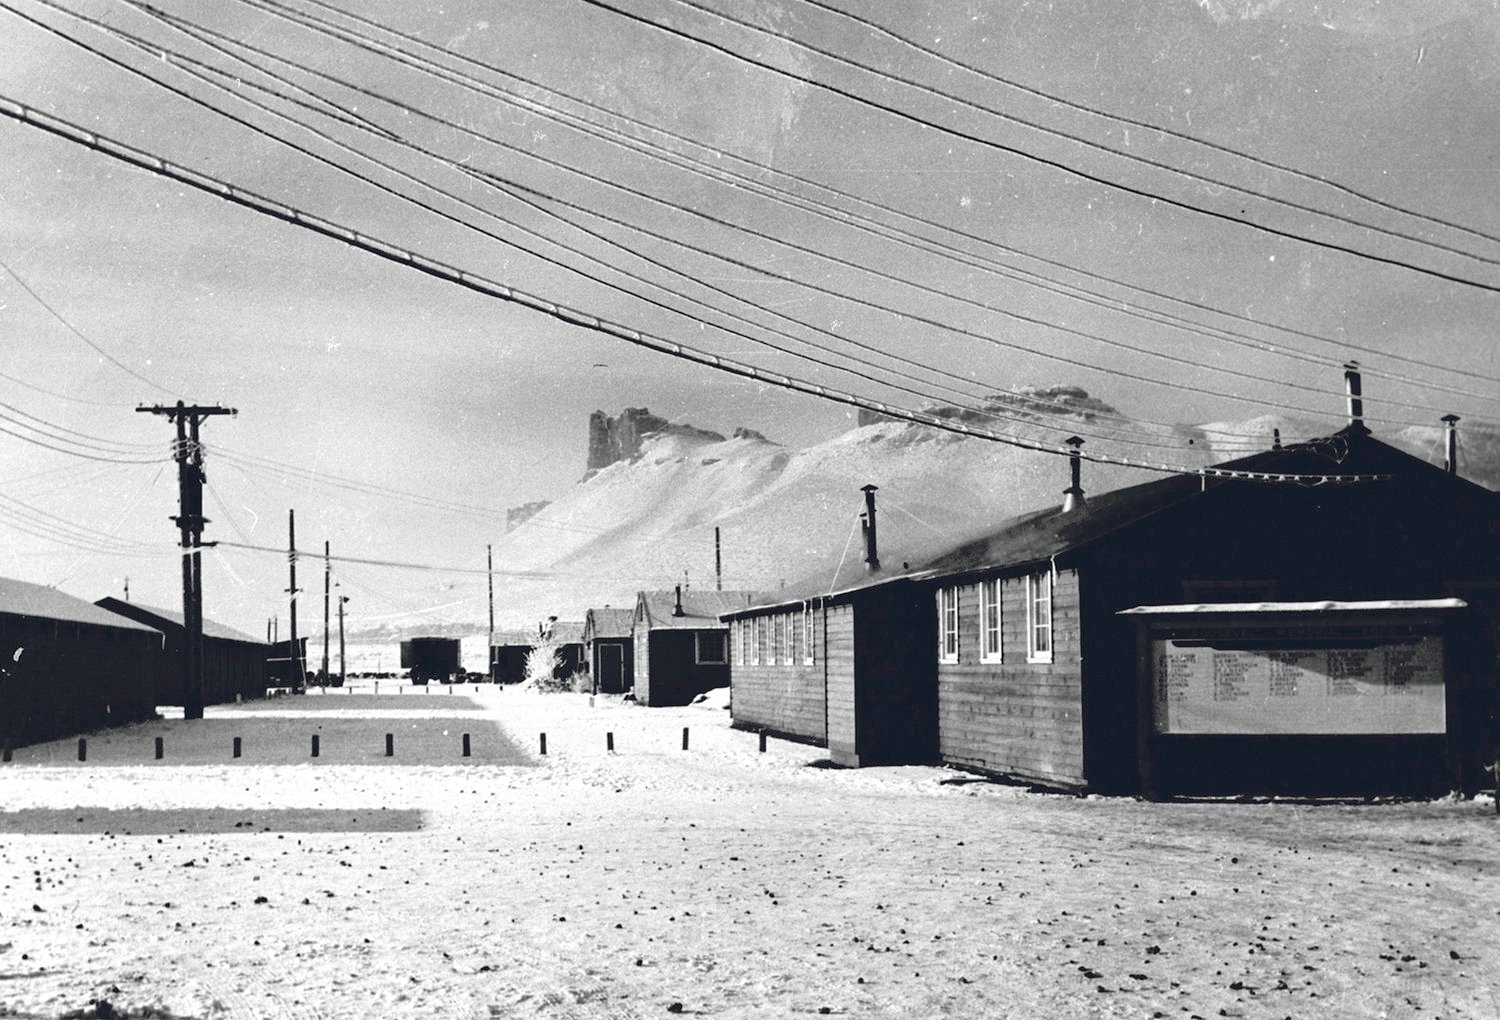 This photo shows the barracks at the Tule Lake incarceration camp, one of 10 such camps throughout the United States. Japanese-American families, incarcerated in early 1942, lived in these camps for the duration of World War II.